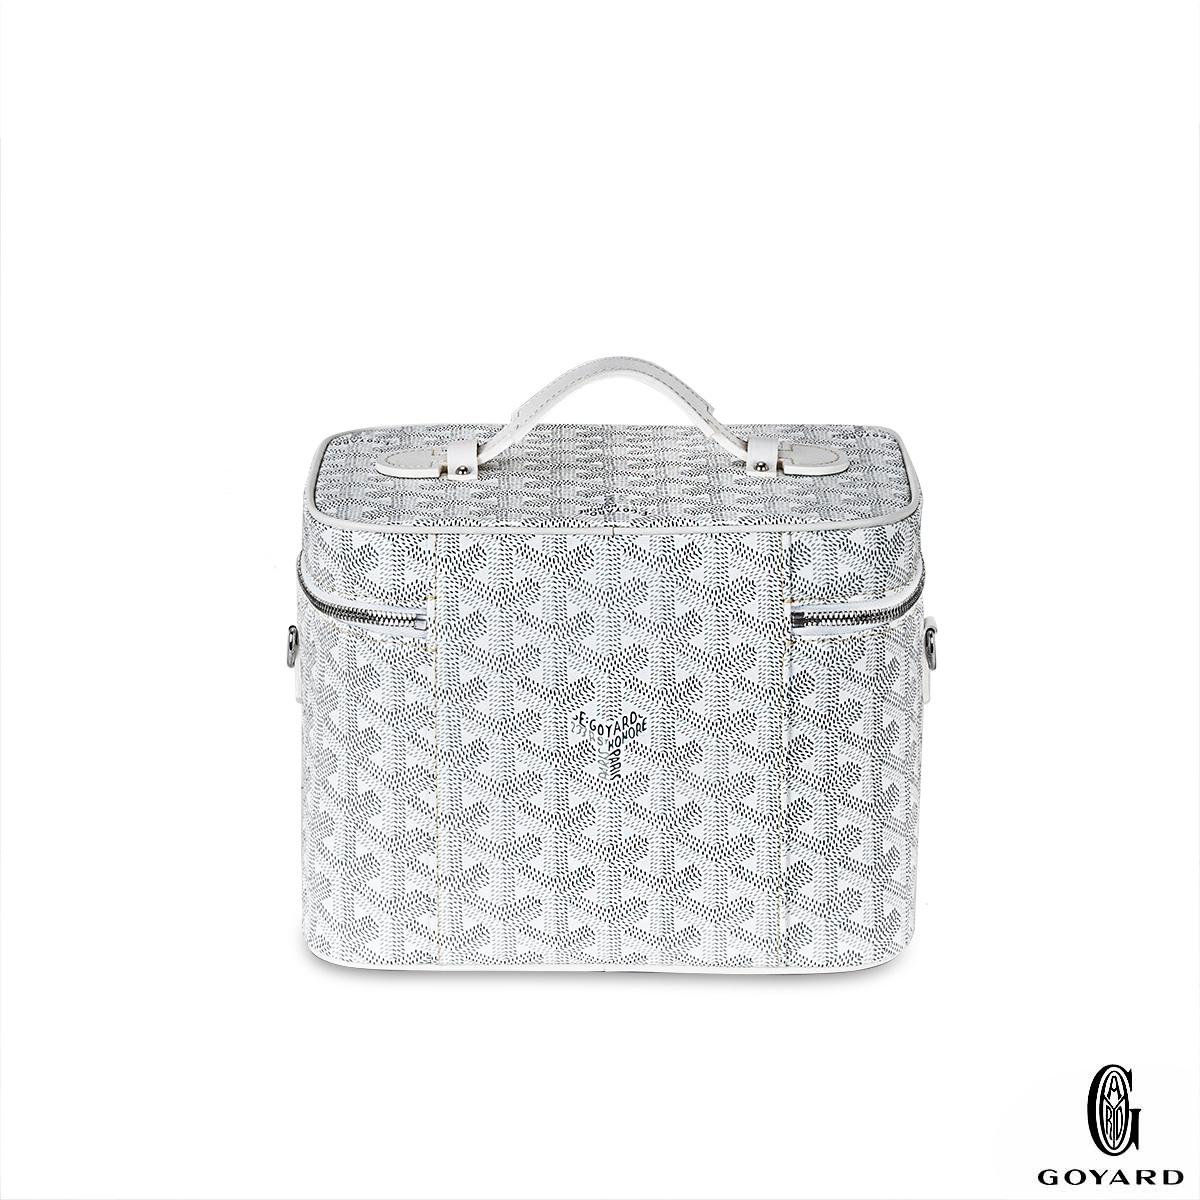 An amazing white Muse Vanity Case by Goyard. The exterior is crafted in white Goyardine Canvas and Cervon Calfskin complemented with palladium hardware and a double zipper. The interior features a yellow water repellant cotton lining, a removable